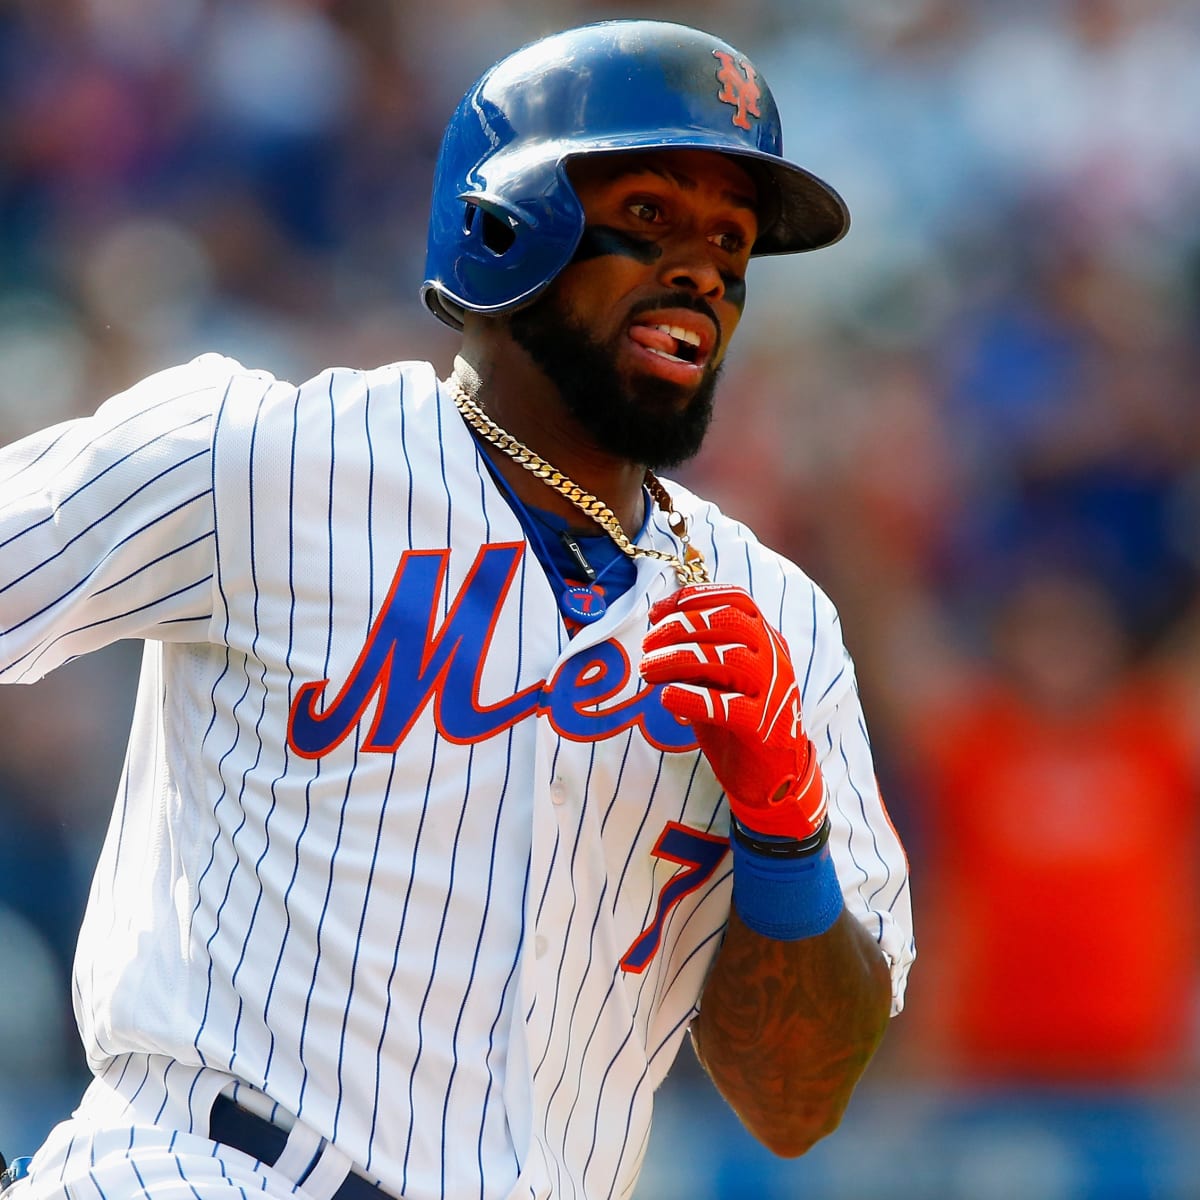 As Jose Reyes joins Mets, domestic violence experts hope nuance